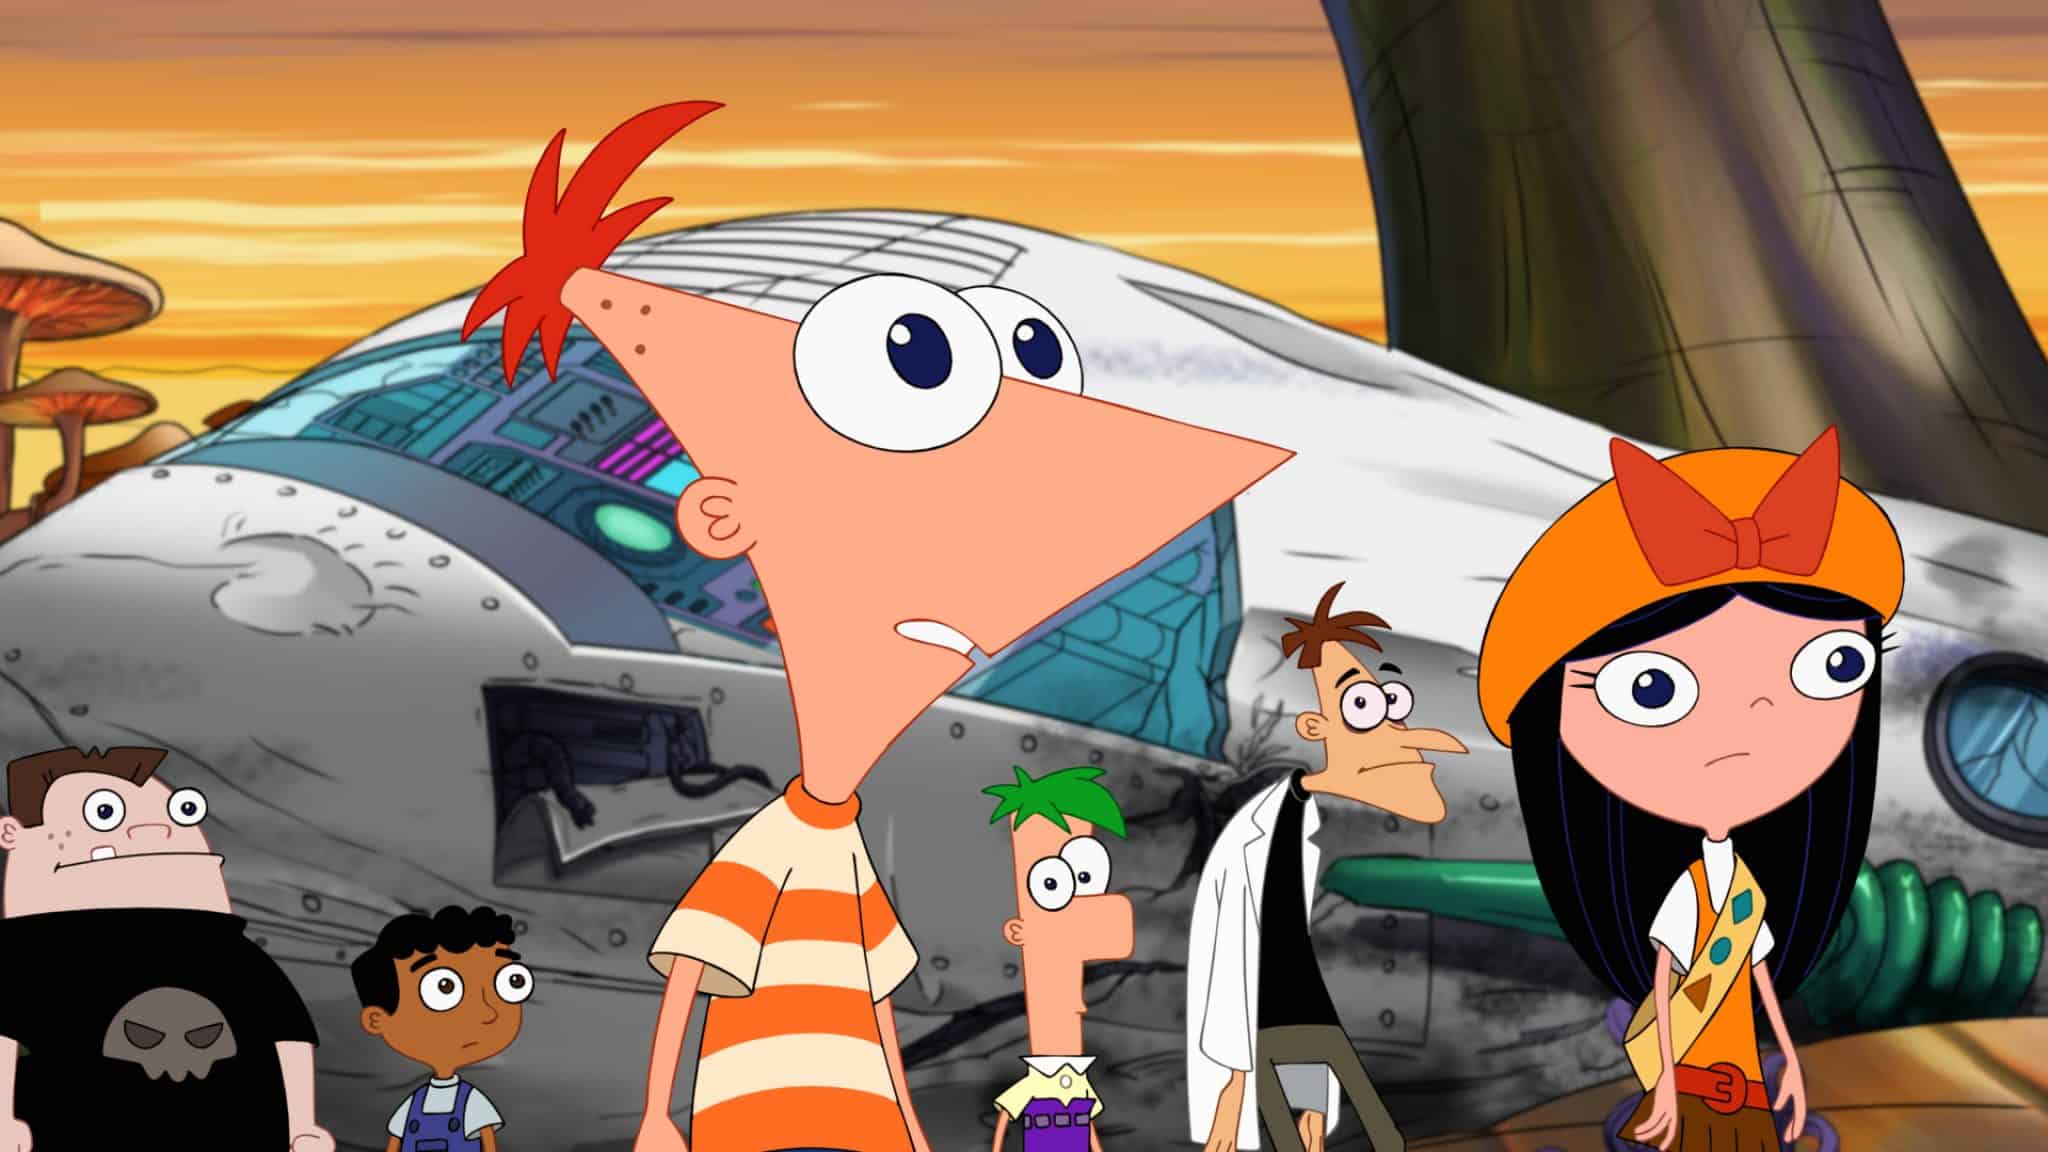 The other amazingly fun part of the "Phineas and Ferb" series and...